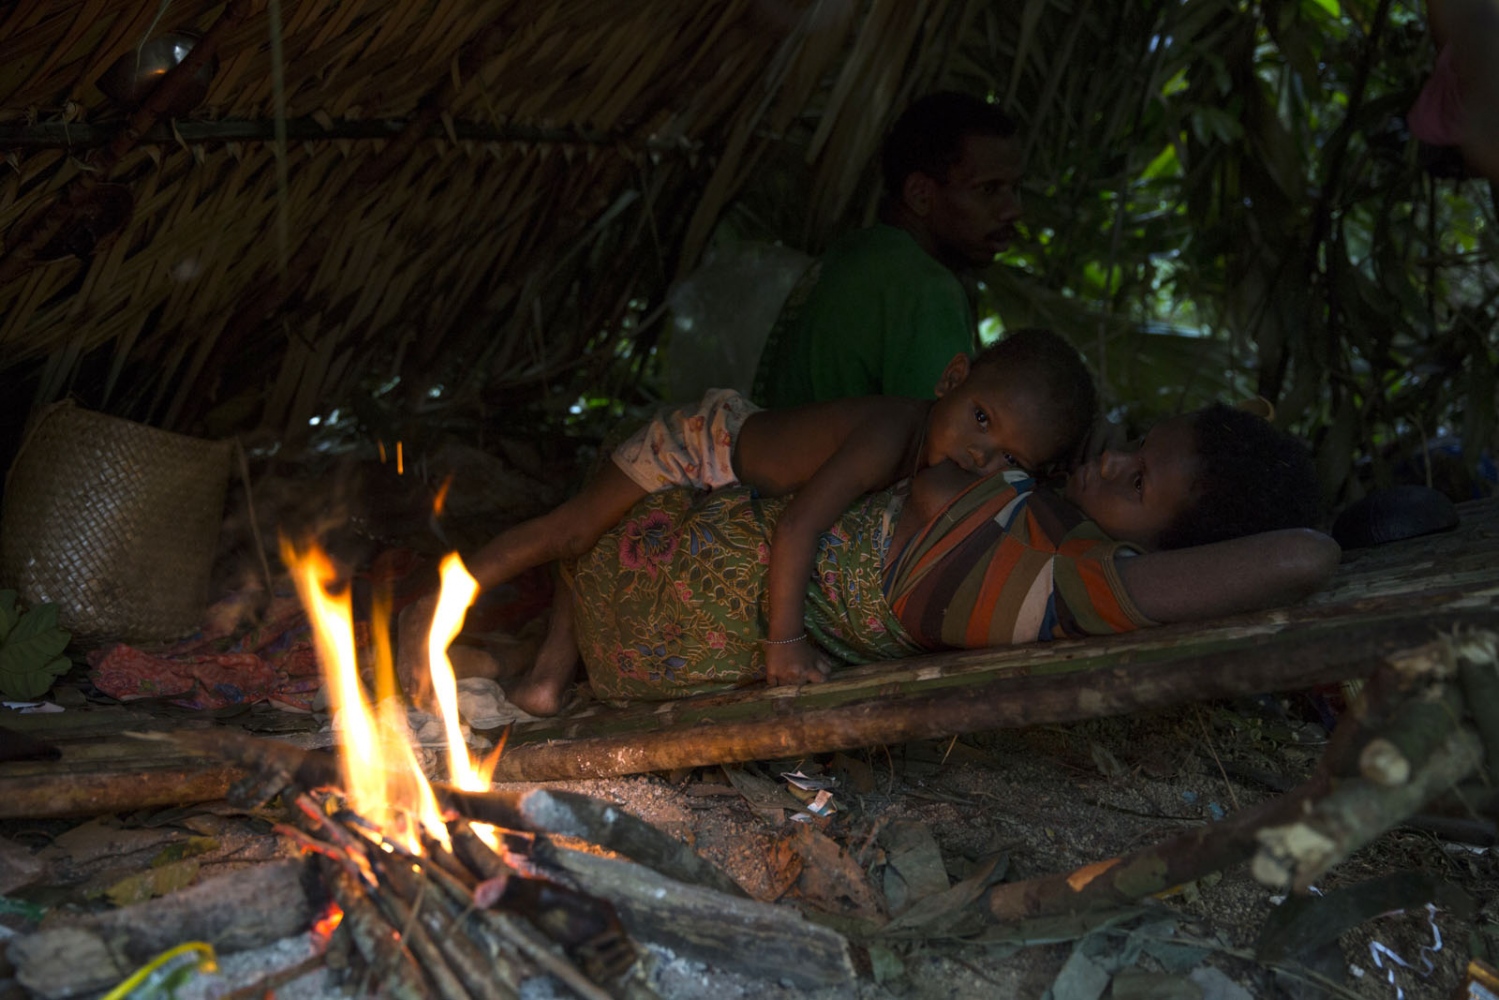 THE MANIQ - A child feeds from his mother inside their traditional...